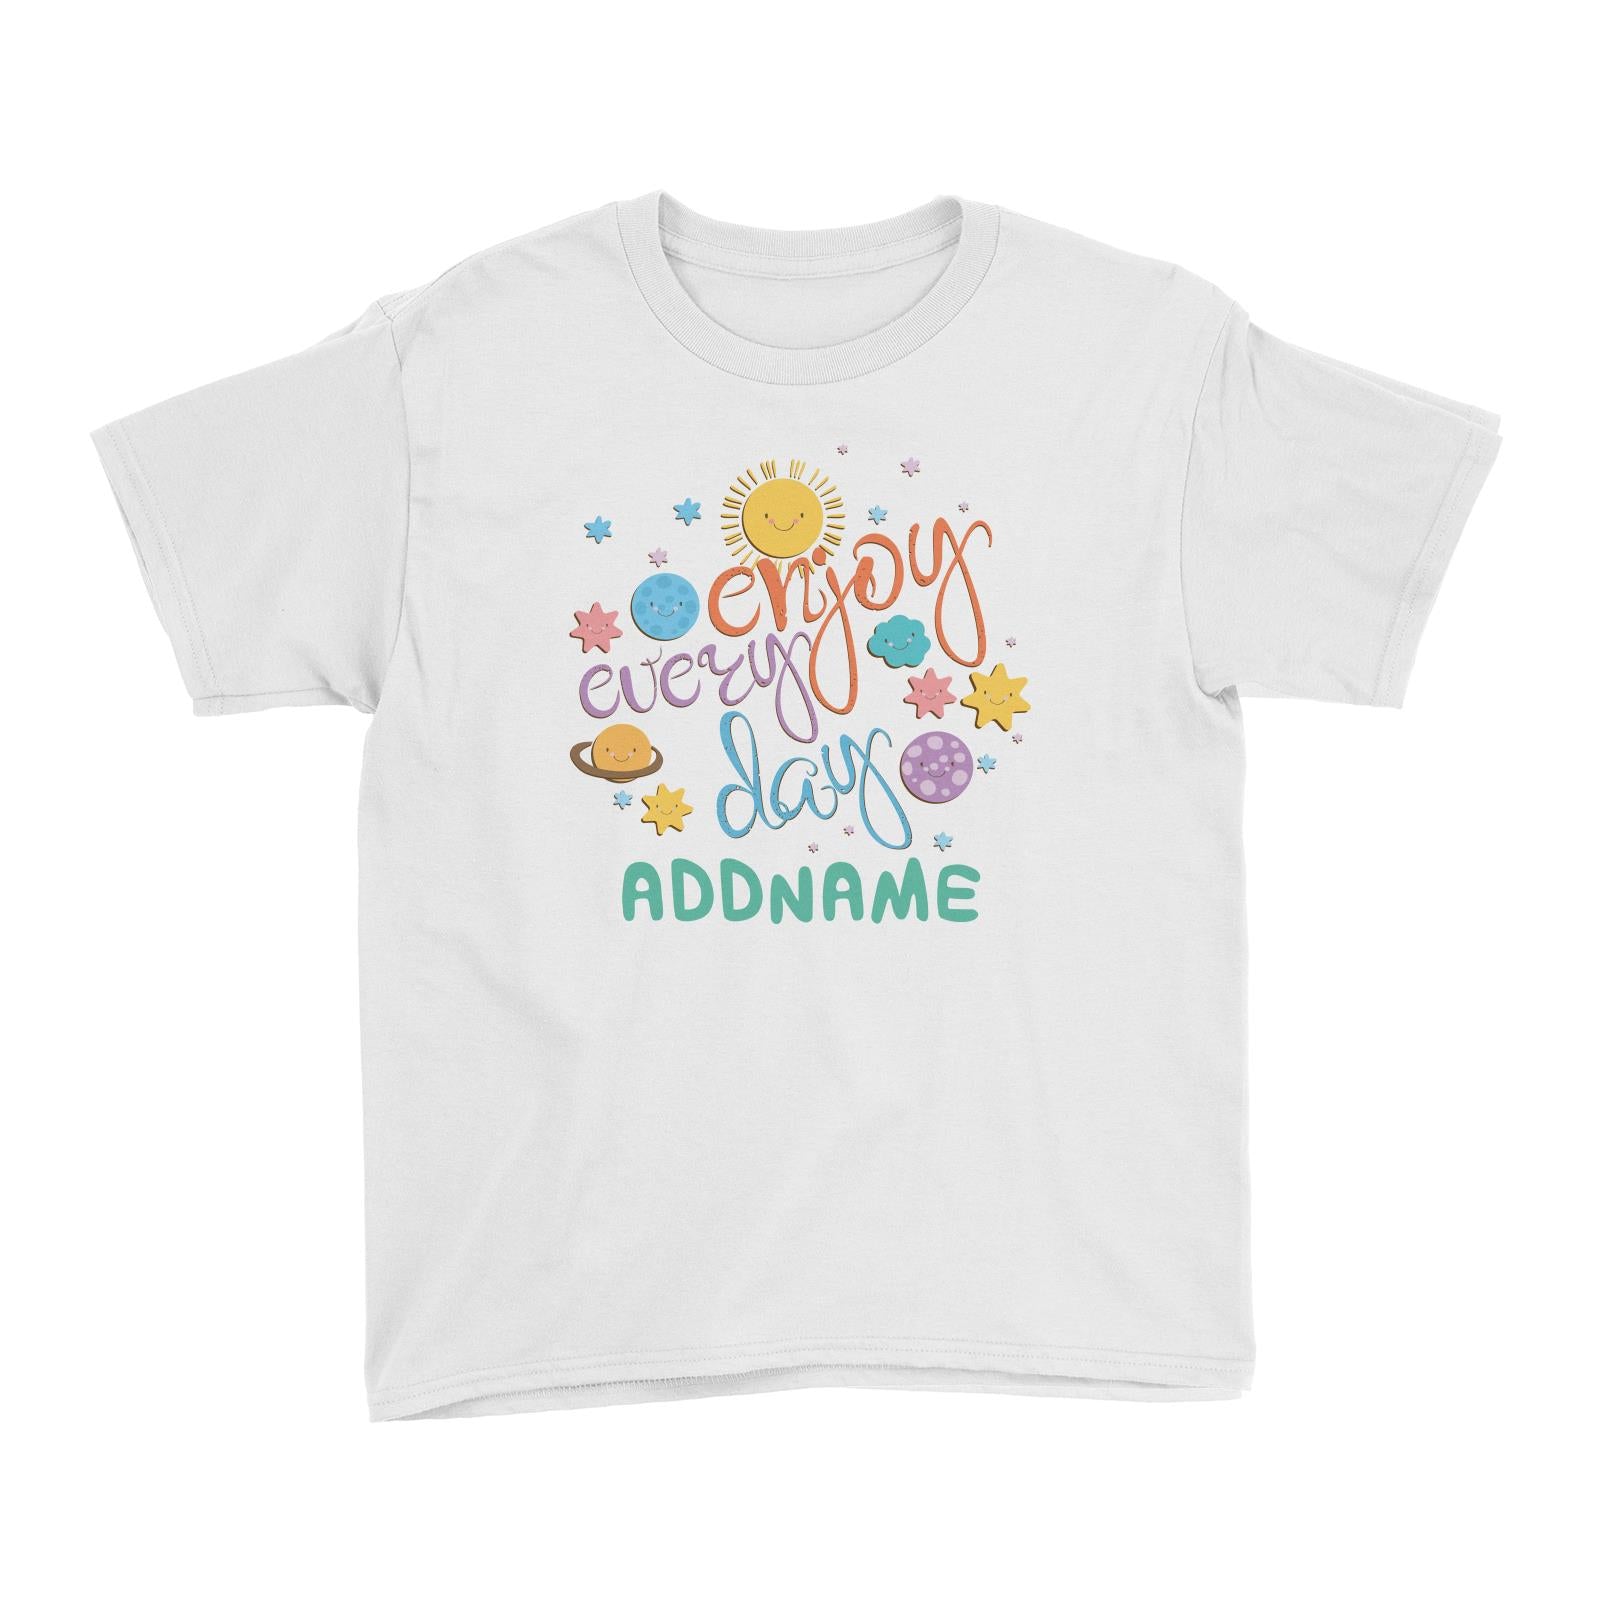 Children's Day Gift Series Enjoy Every Day Space Addname Kid's T-Shirt